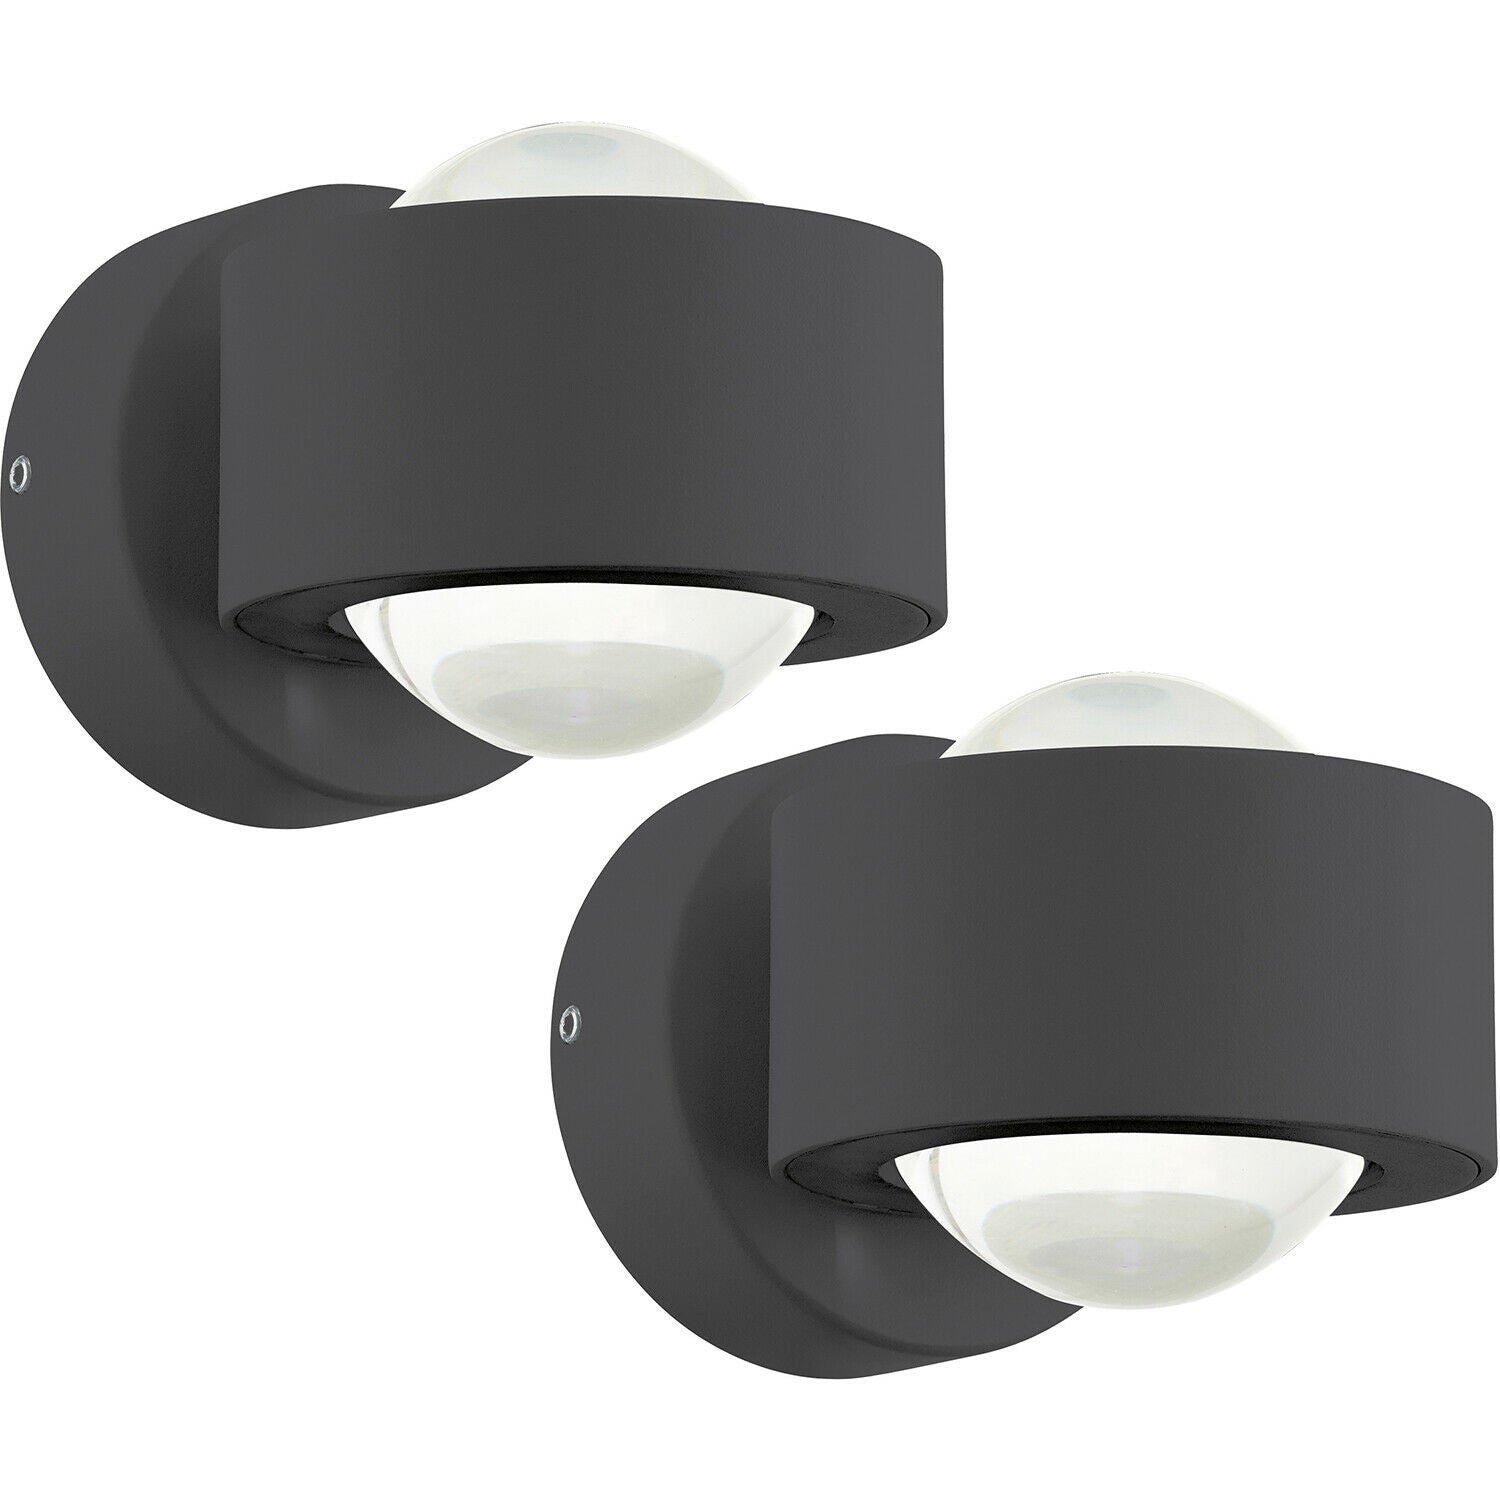 2 PACK Wall Light Colour Anthracite Shade Clear Plastic LED 2x2.5W Included